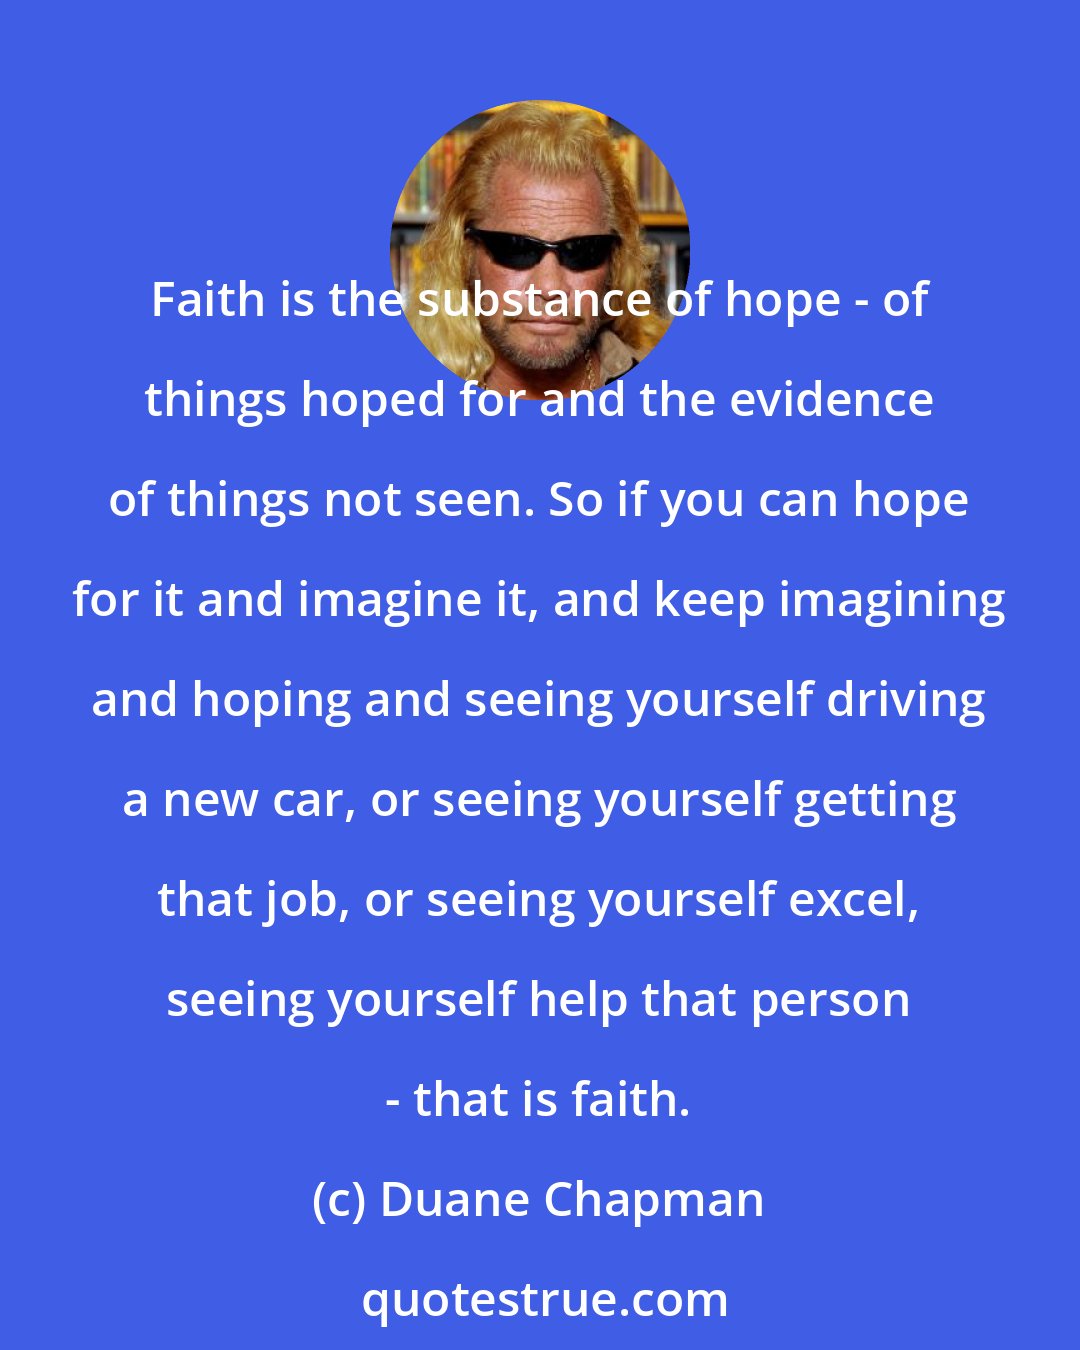 Duane Chapman: Faith is the substance of hope - of things hoped for and the evidence of things not seen. So if you can hope for it and imagine it, and keep imagining and hoping and seeing yourself driving a new car, or seeing yourself getting that job, or seeing yourself excel, seeing yourself help that person - that is faith.